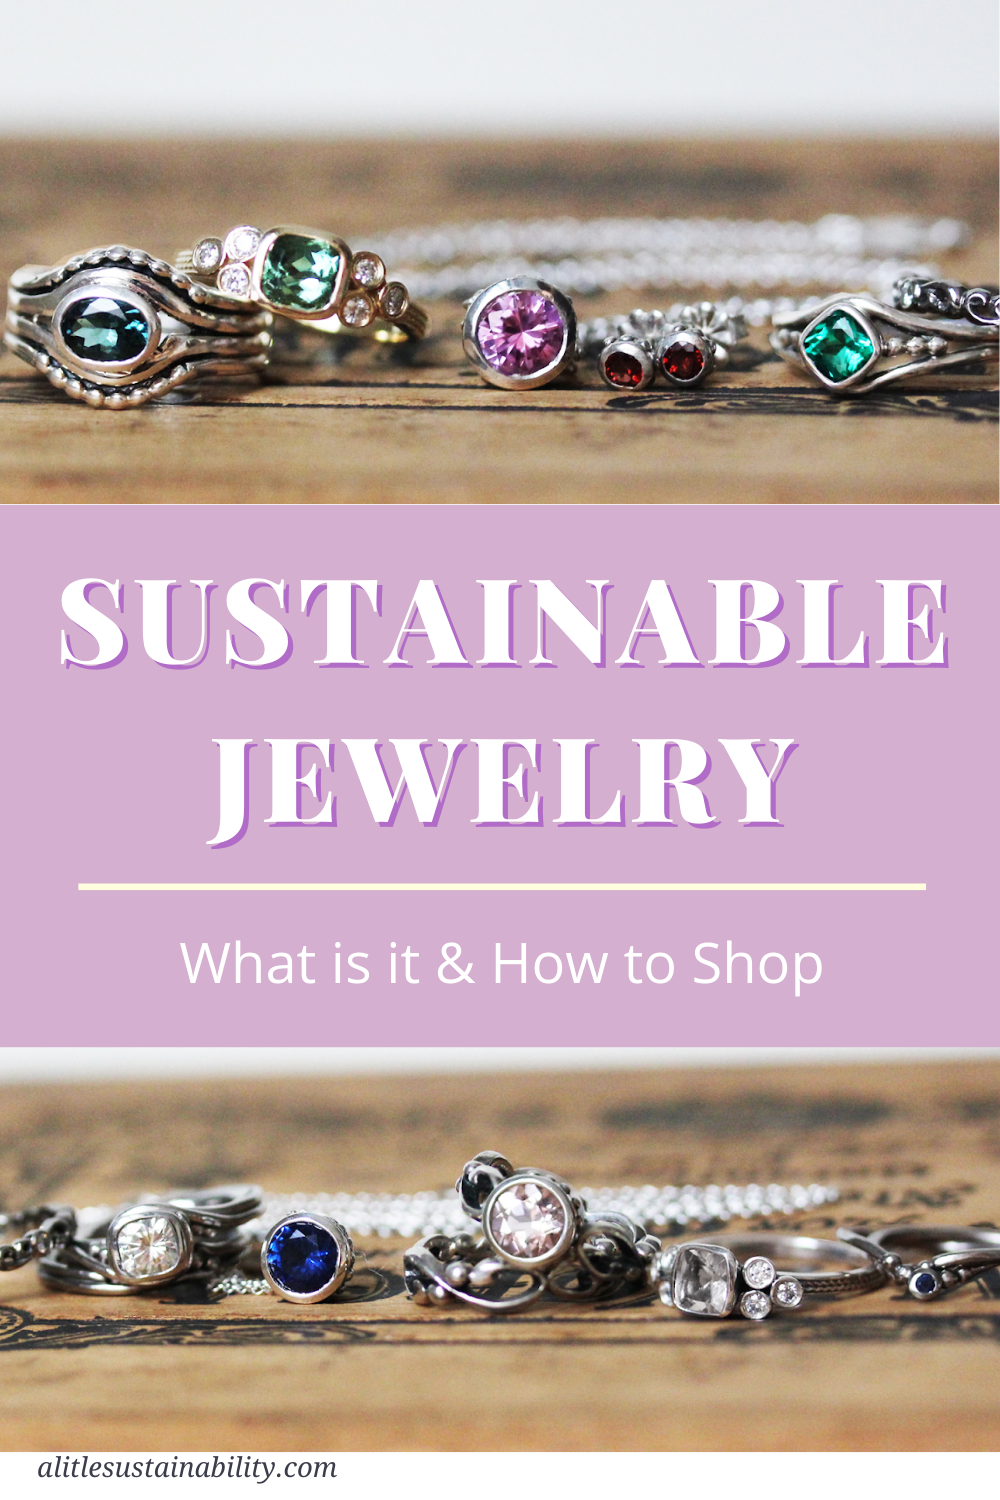 How to shop for ethical and sustainable handmade jewelry. Metalicious and A Little Sustainability partner to teach you all about ethical jewelry. Visit www.alittlesustainability.com for more.